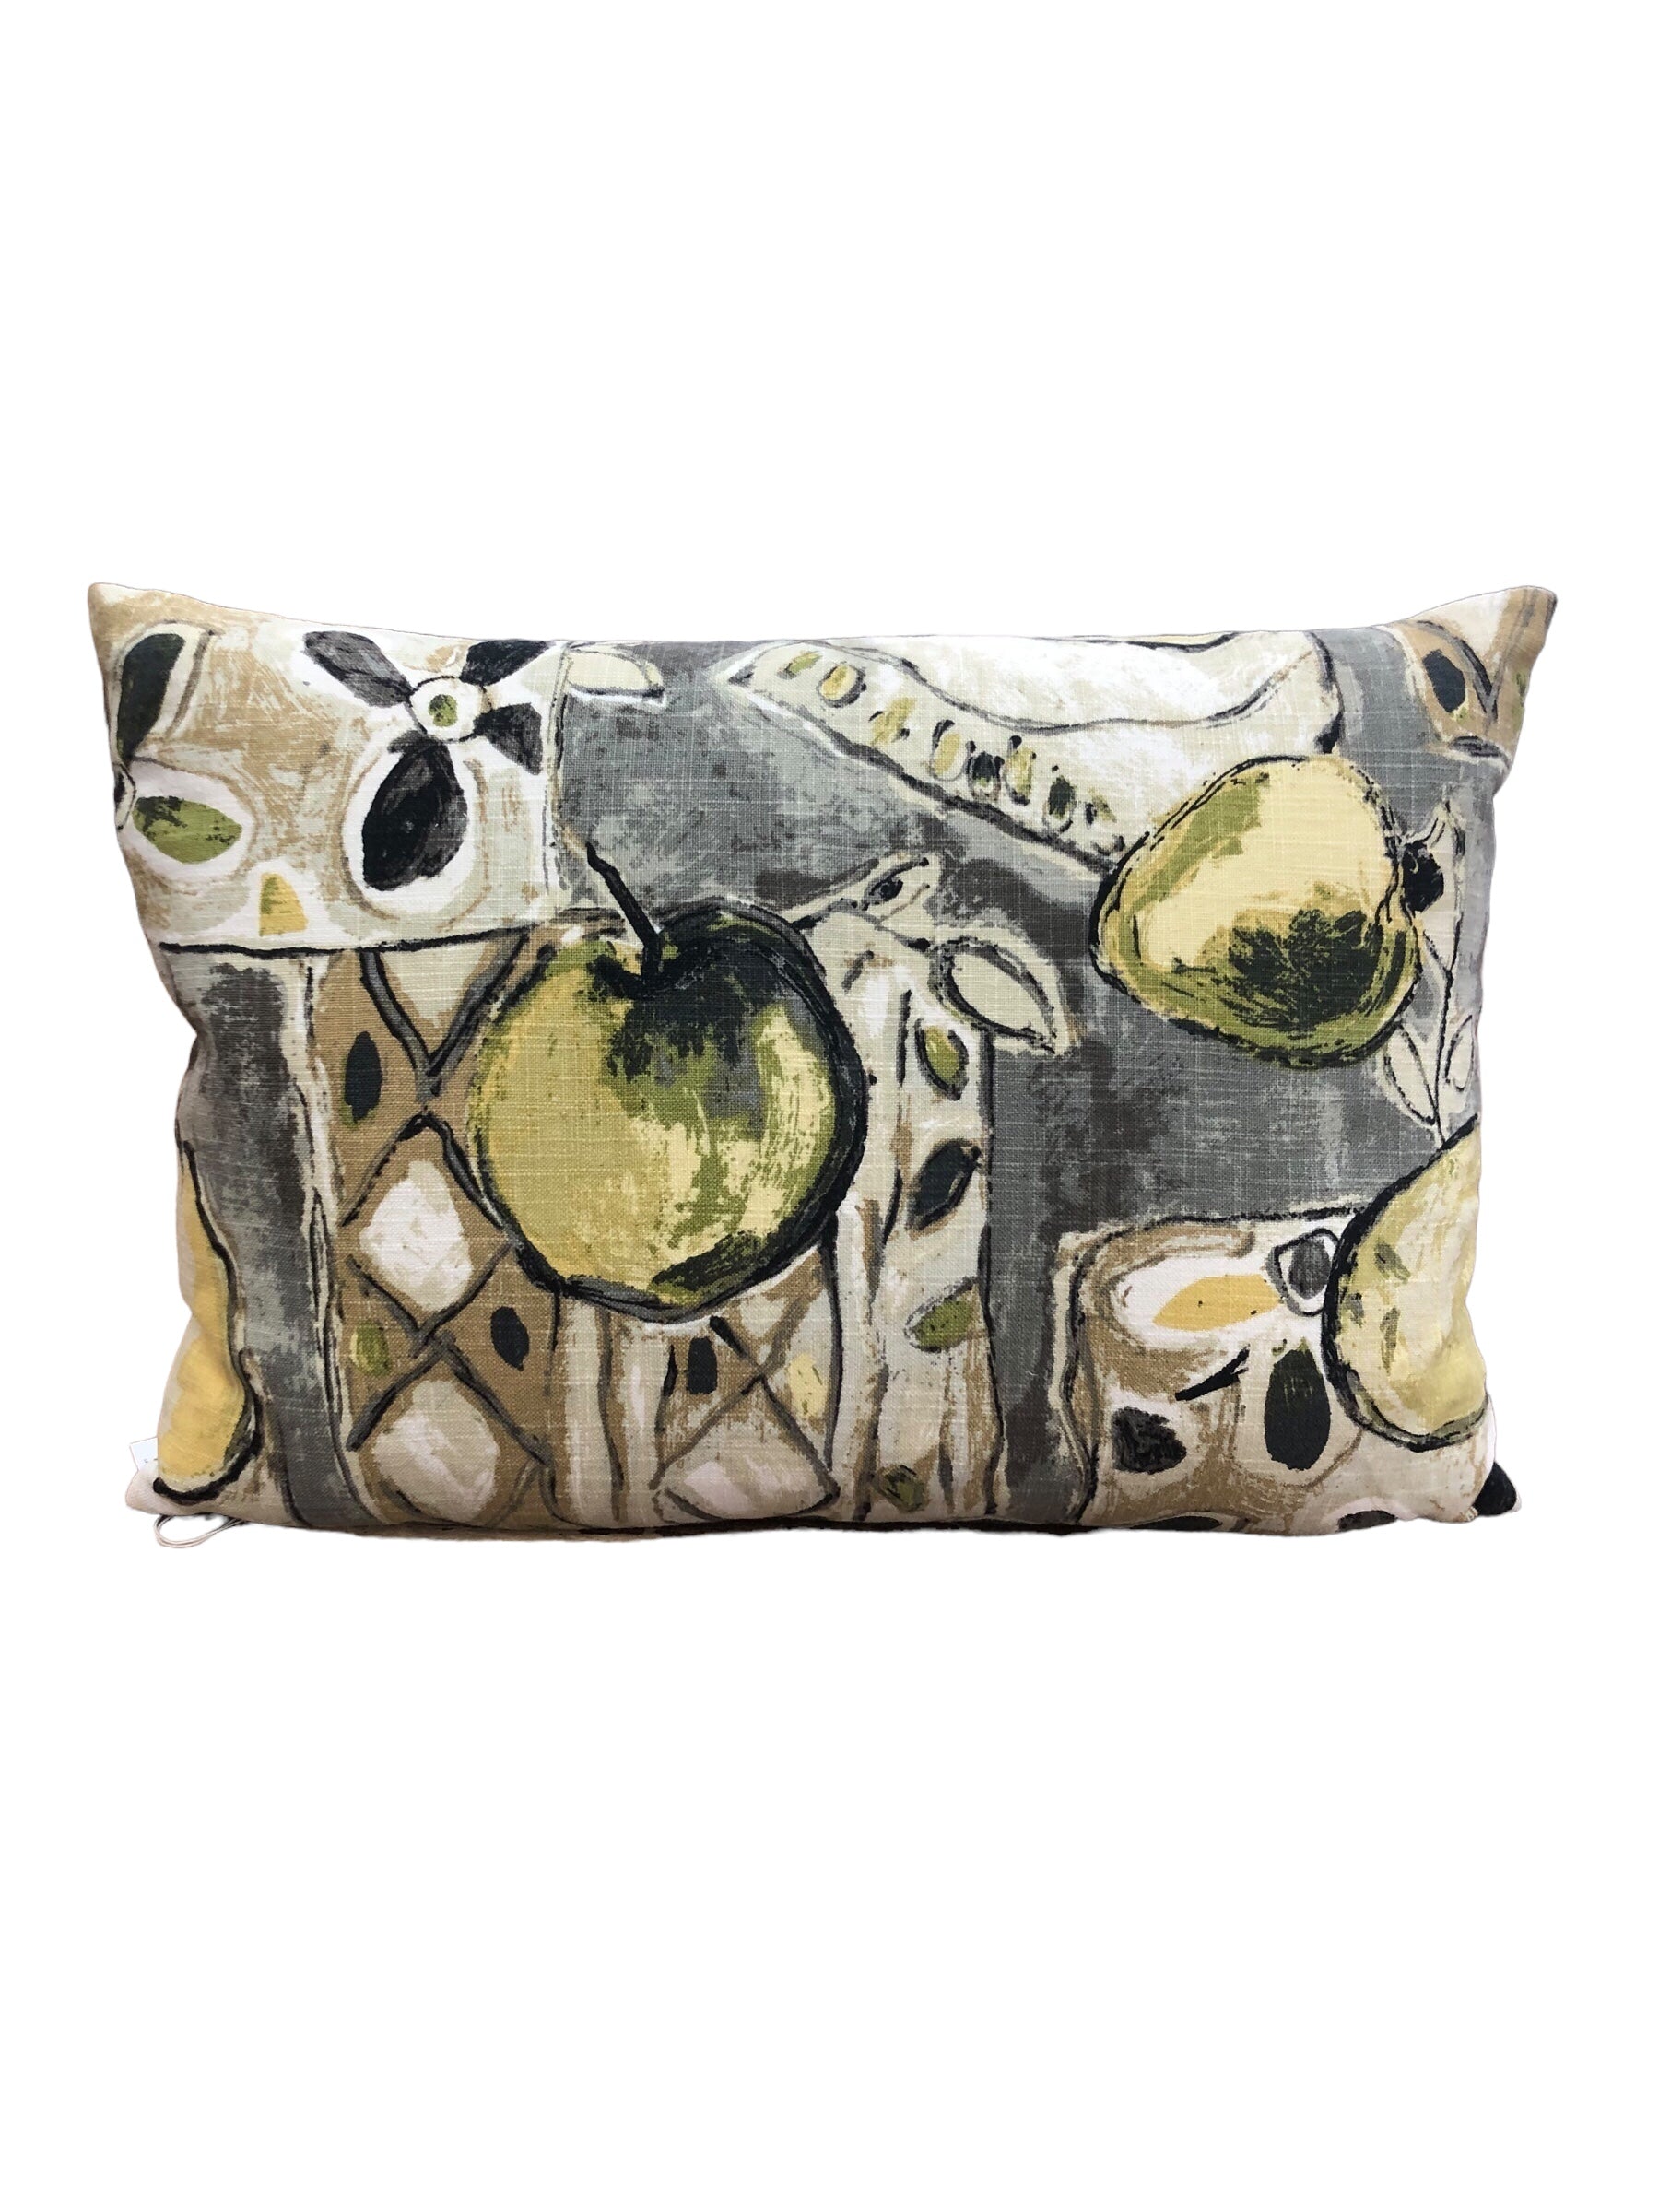 Pillow with Apples